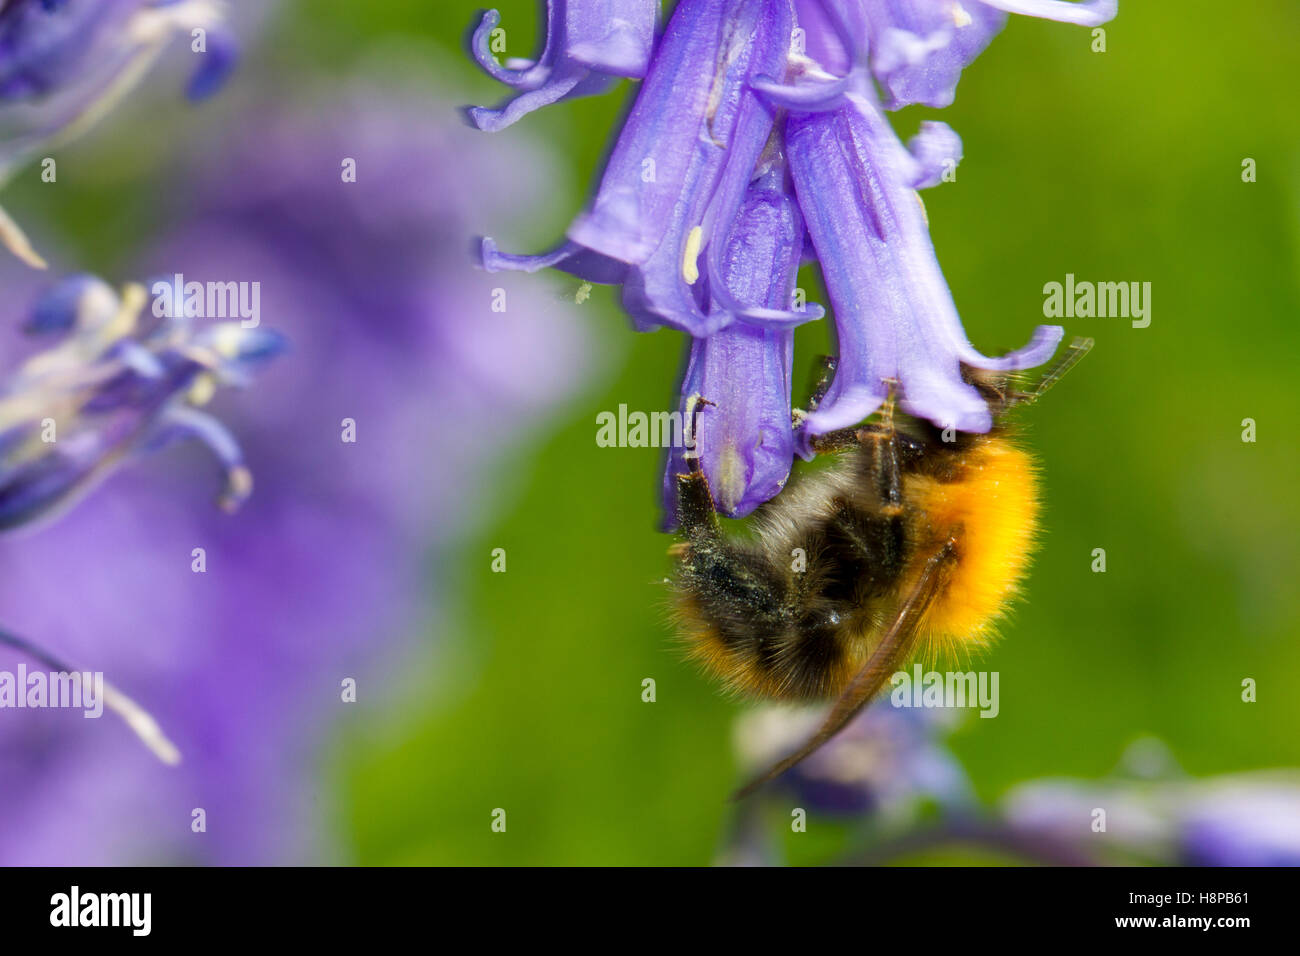 Common Carder Bumblebee (Bombus pascuorum) adult worker feeding in a bluebell (Hyacinthoides non-scripta) flower. Stock Photo